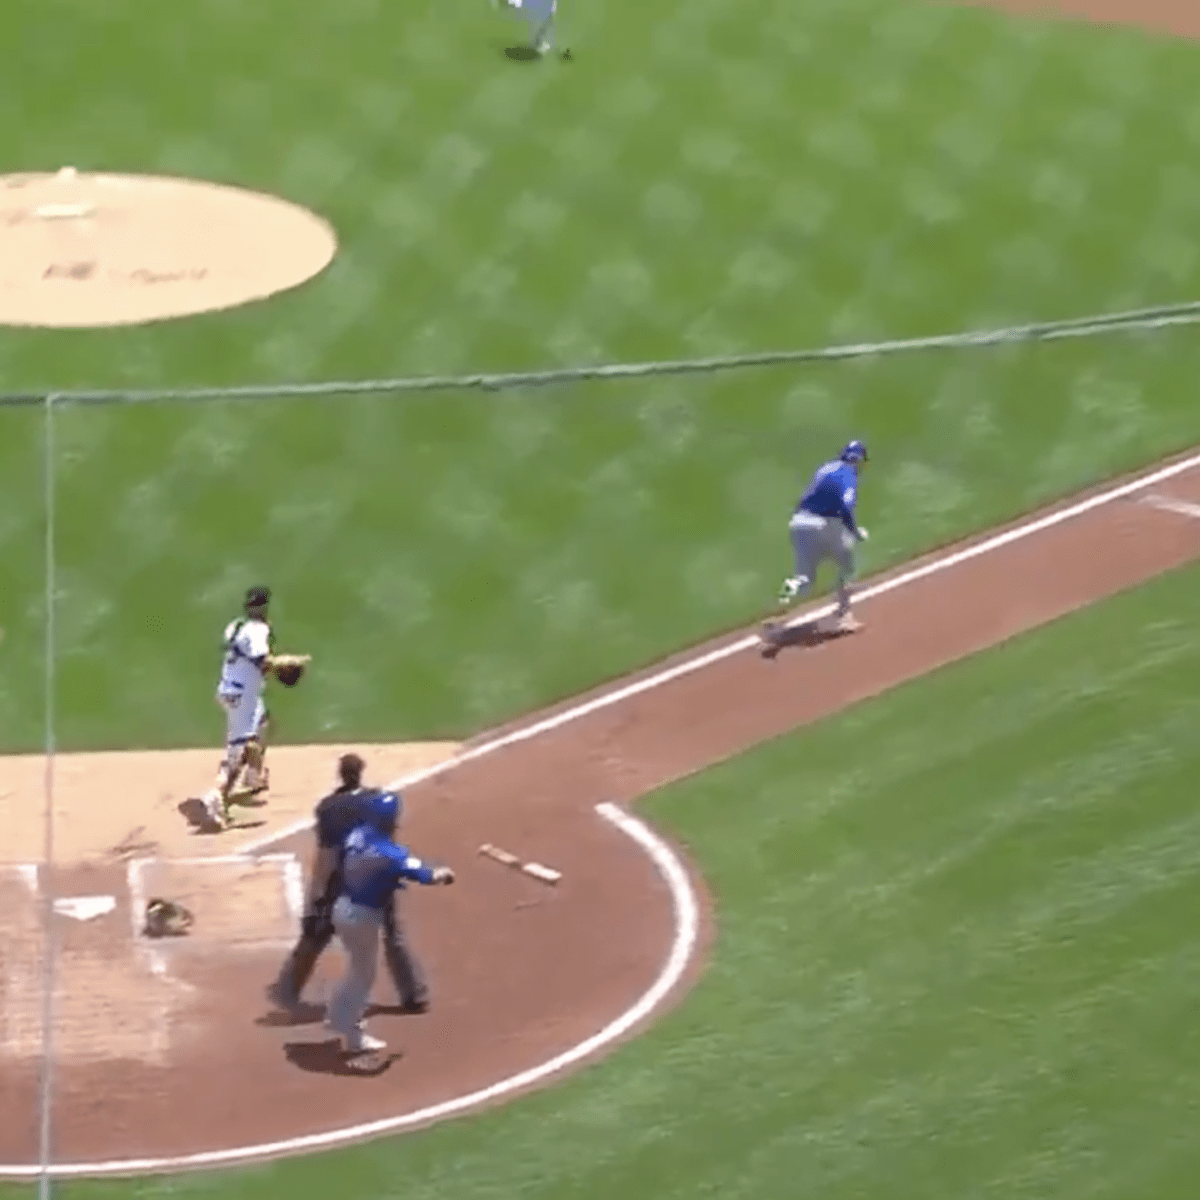 Javy Baez makes outrageous play to score run in Cubs' win